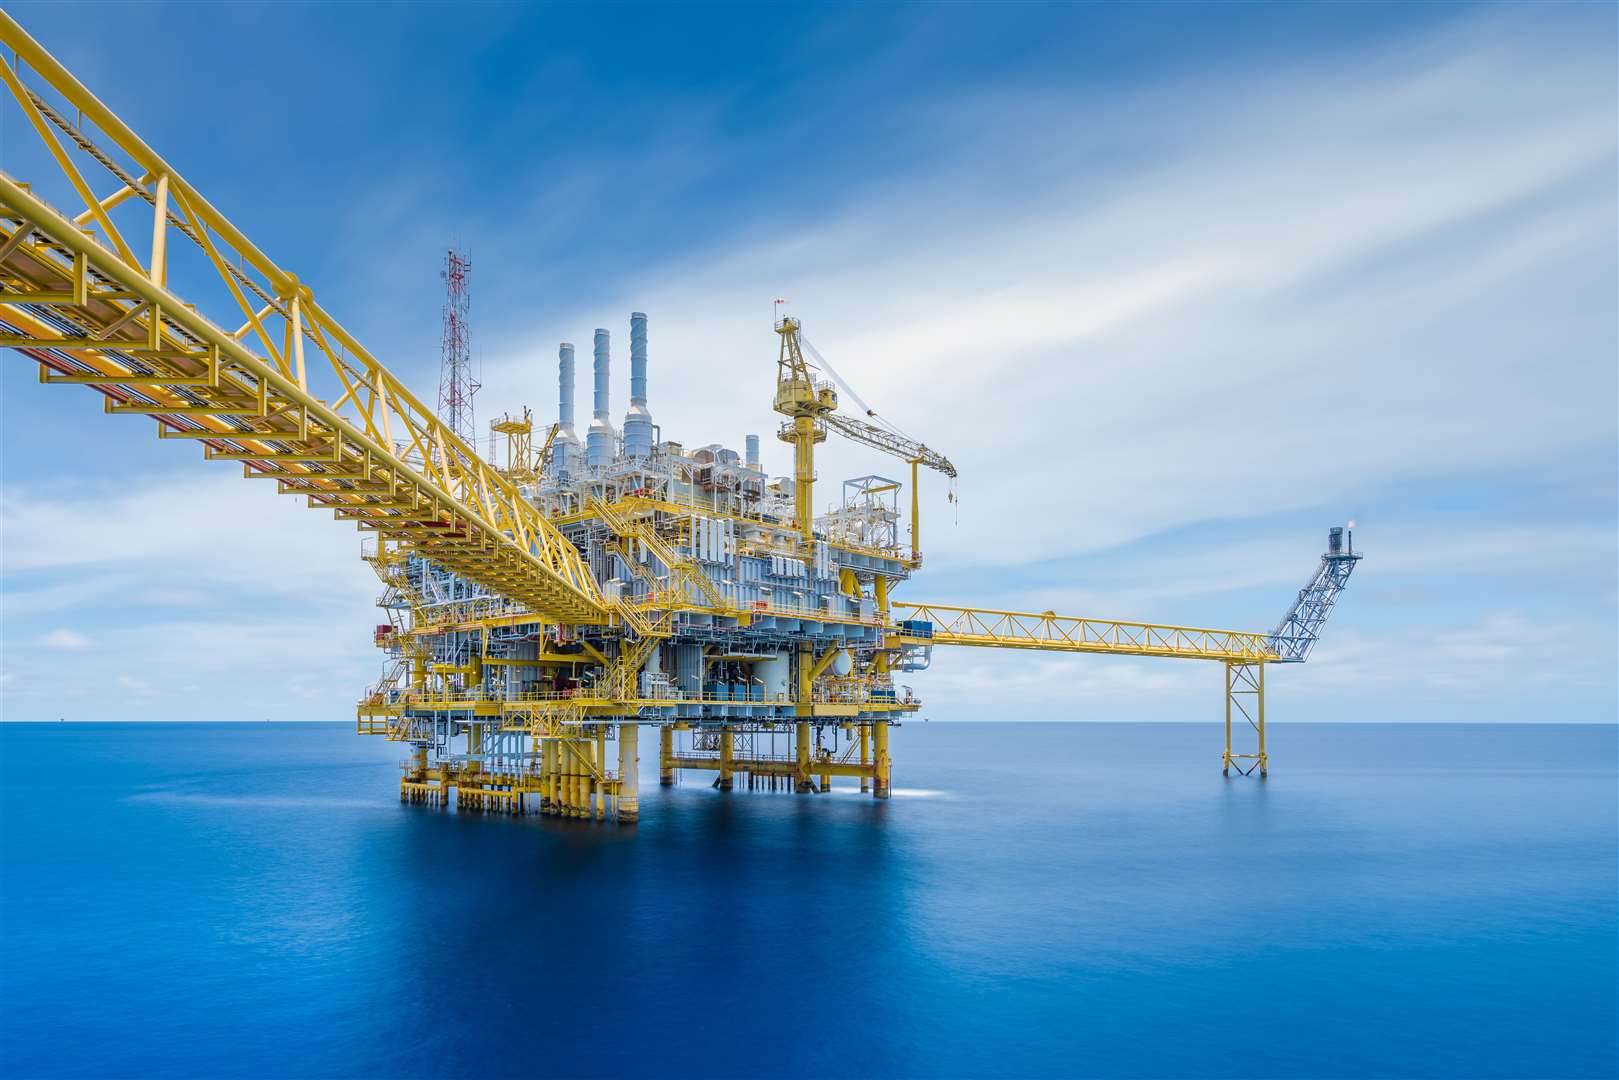 The Scottish Government's plans to replace North Sea oil and gas jobs have come under fire.